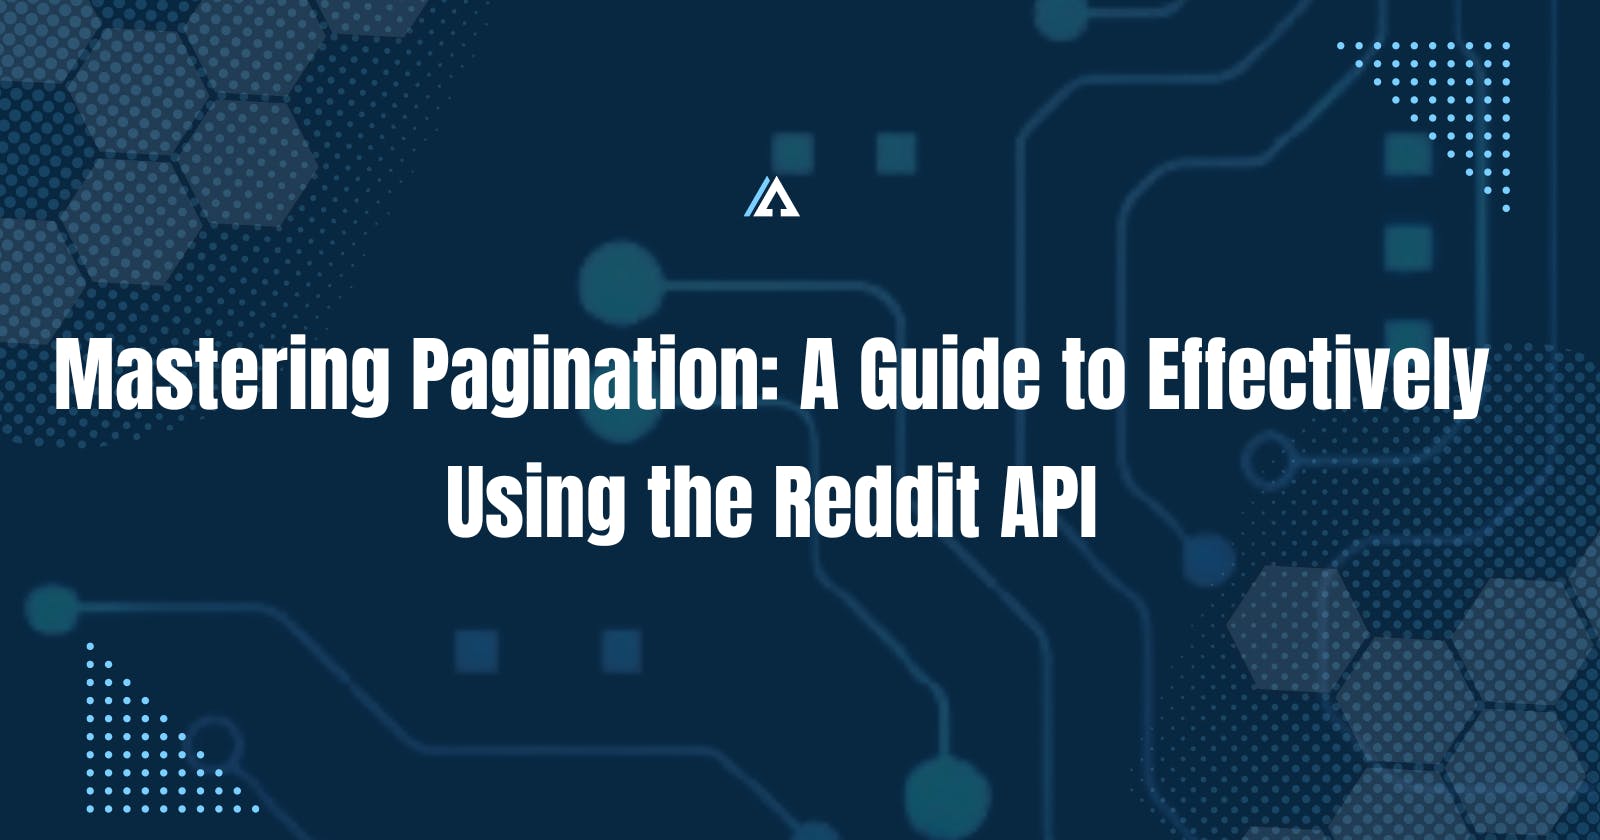 Mastering Pagination: A Guide to Effectively Using the Reddit API